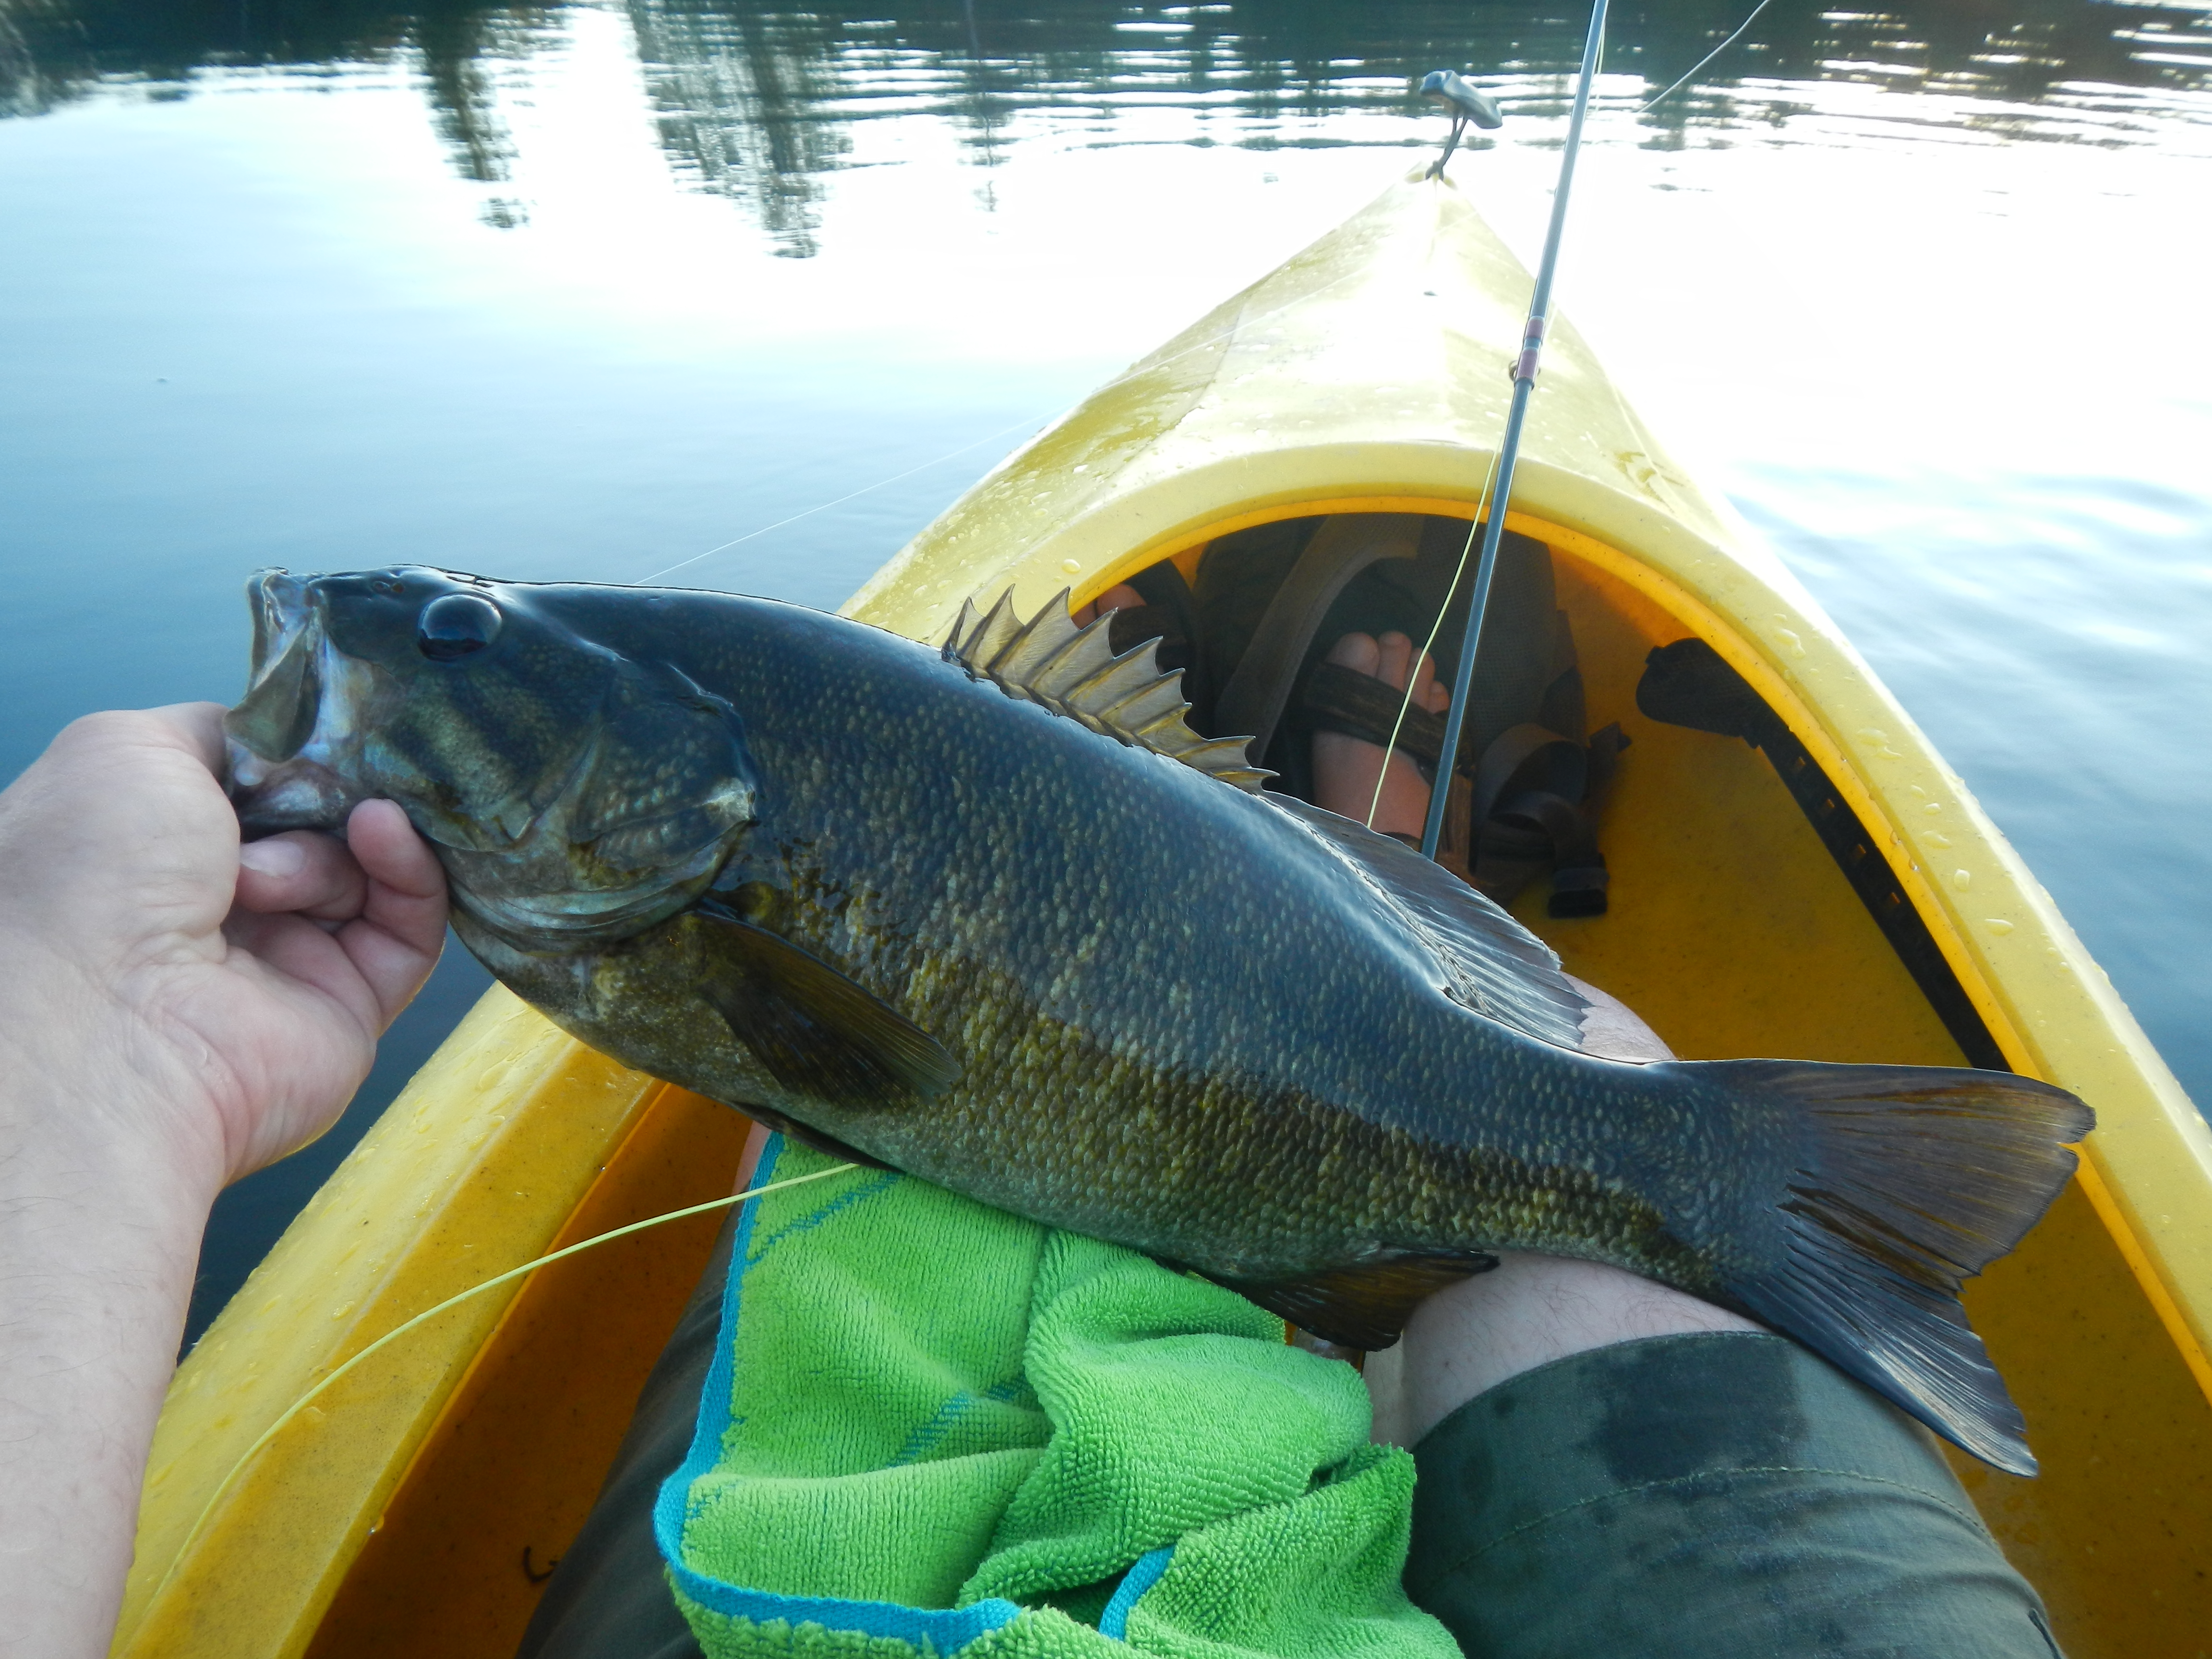 20 inches of smallmouth bass, my biggest ever!